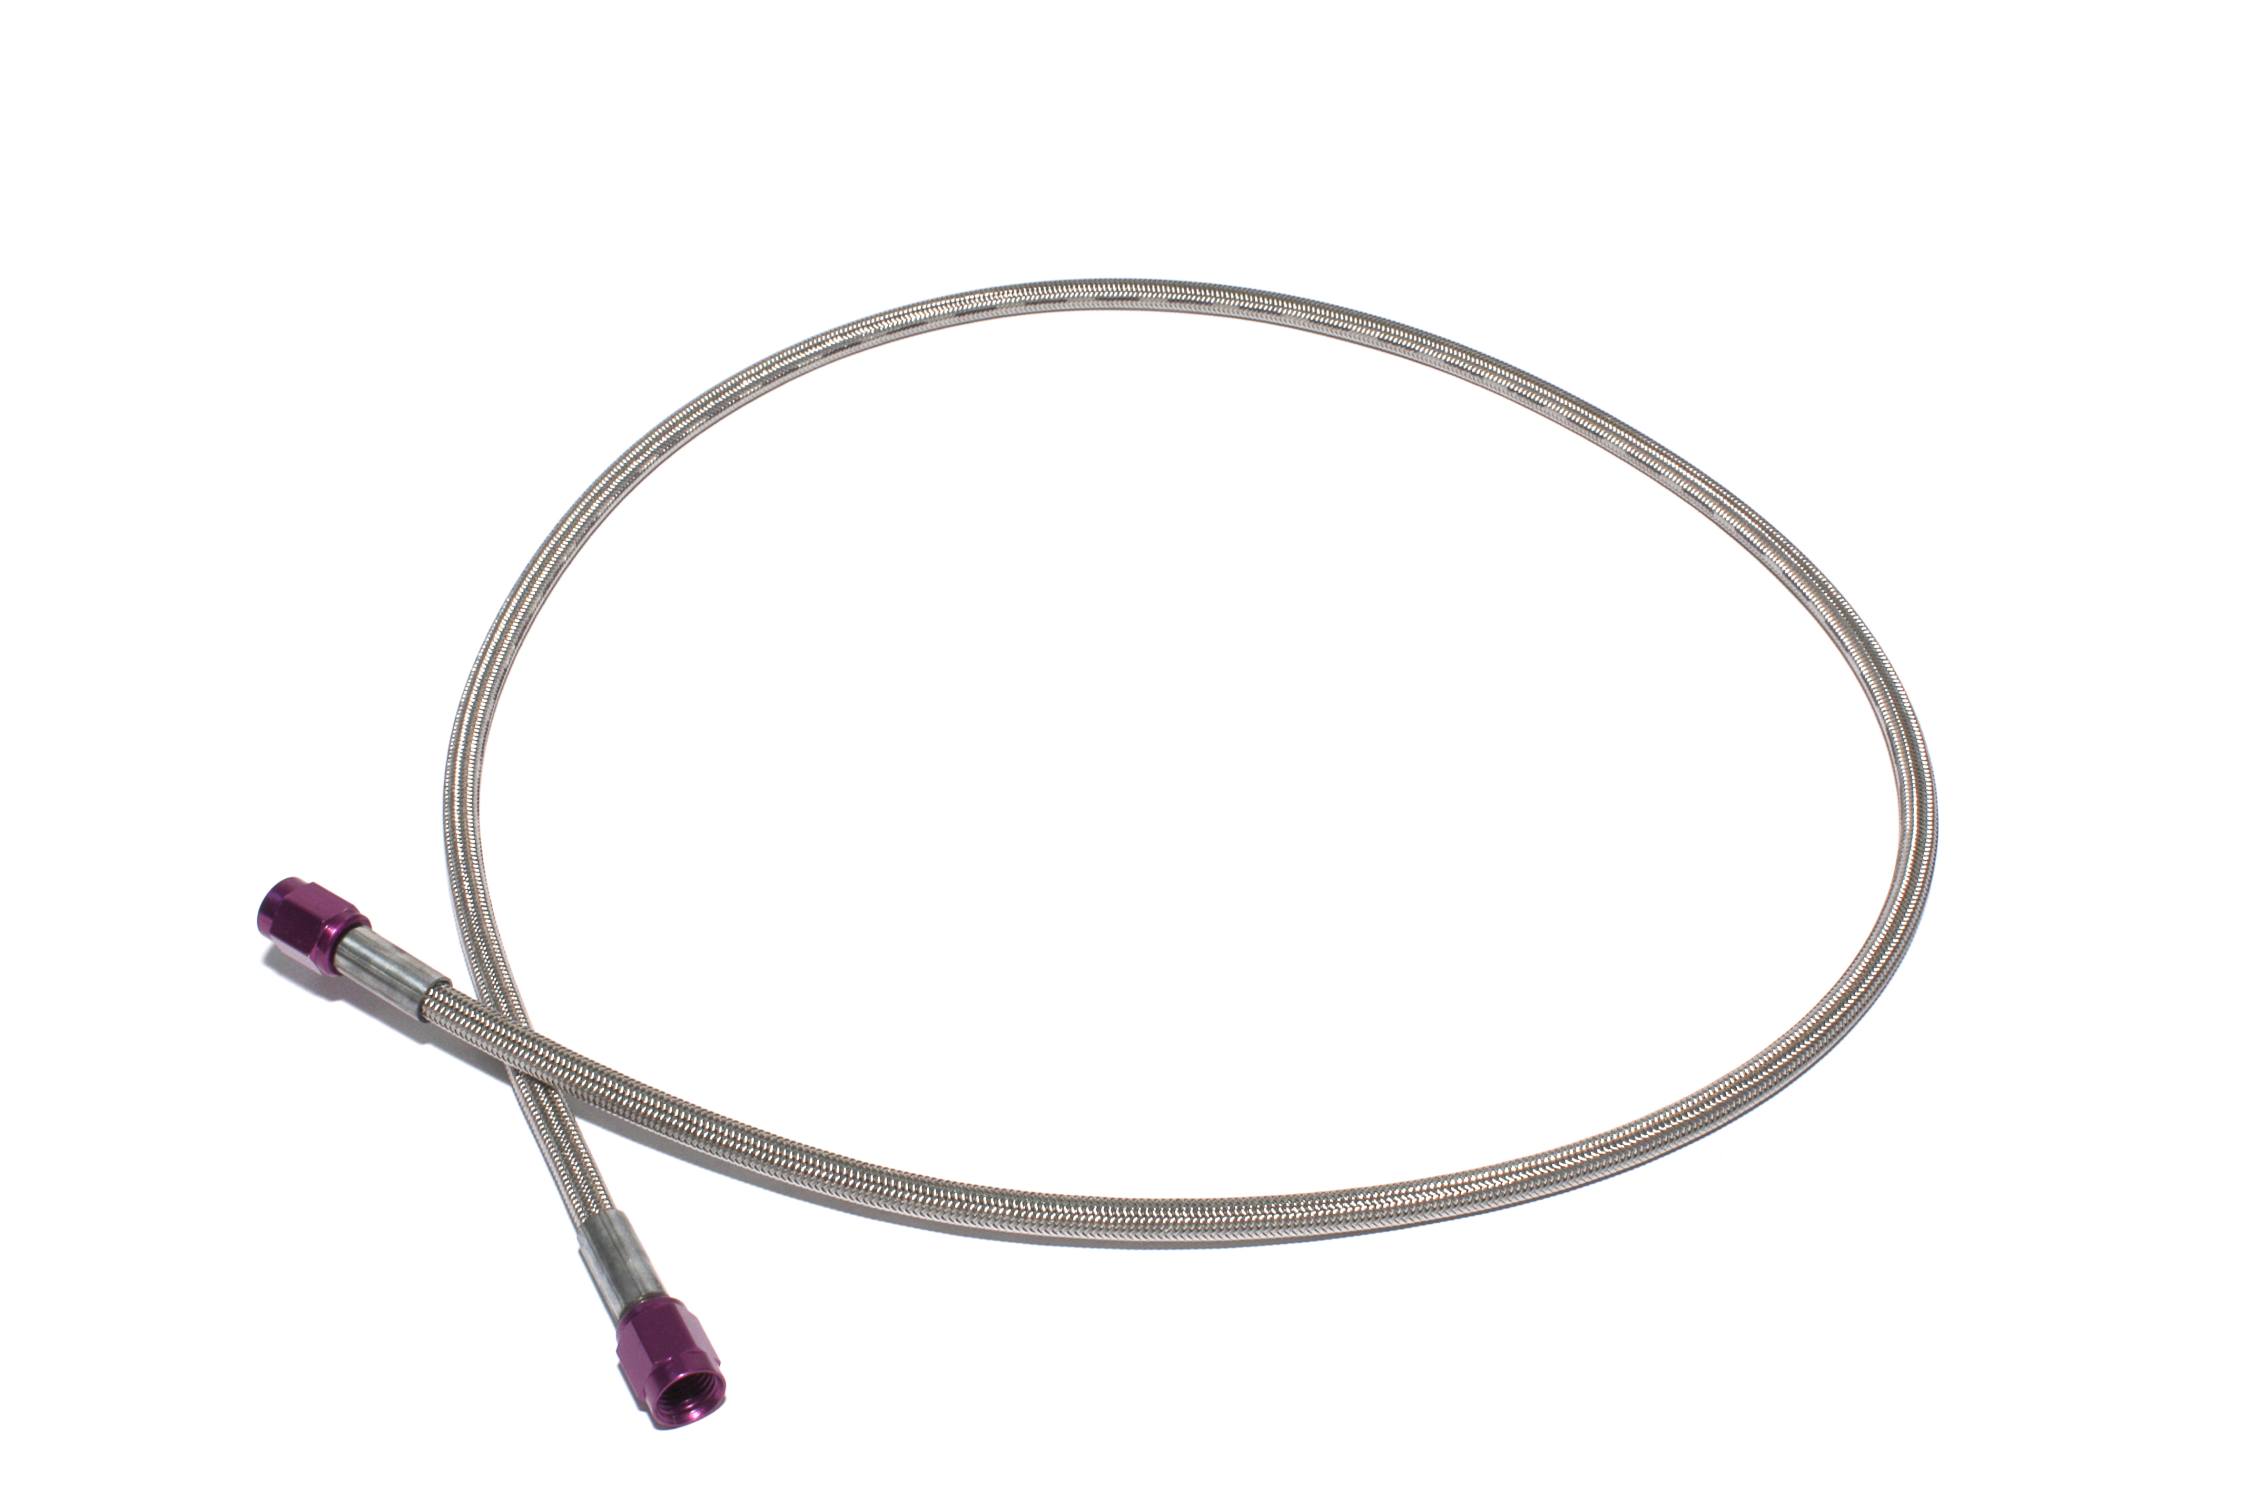 ZEX 2' (ft) Long -3AN Braided Hose with Purple Ends, 3AN 2', Corvette, Camaro and others